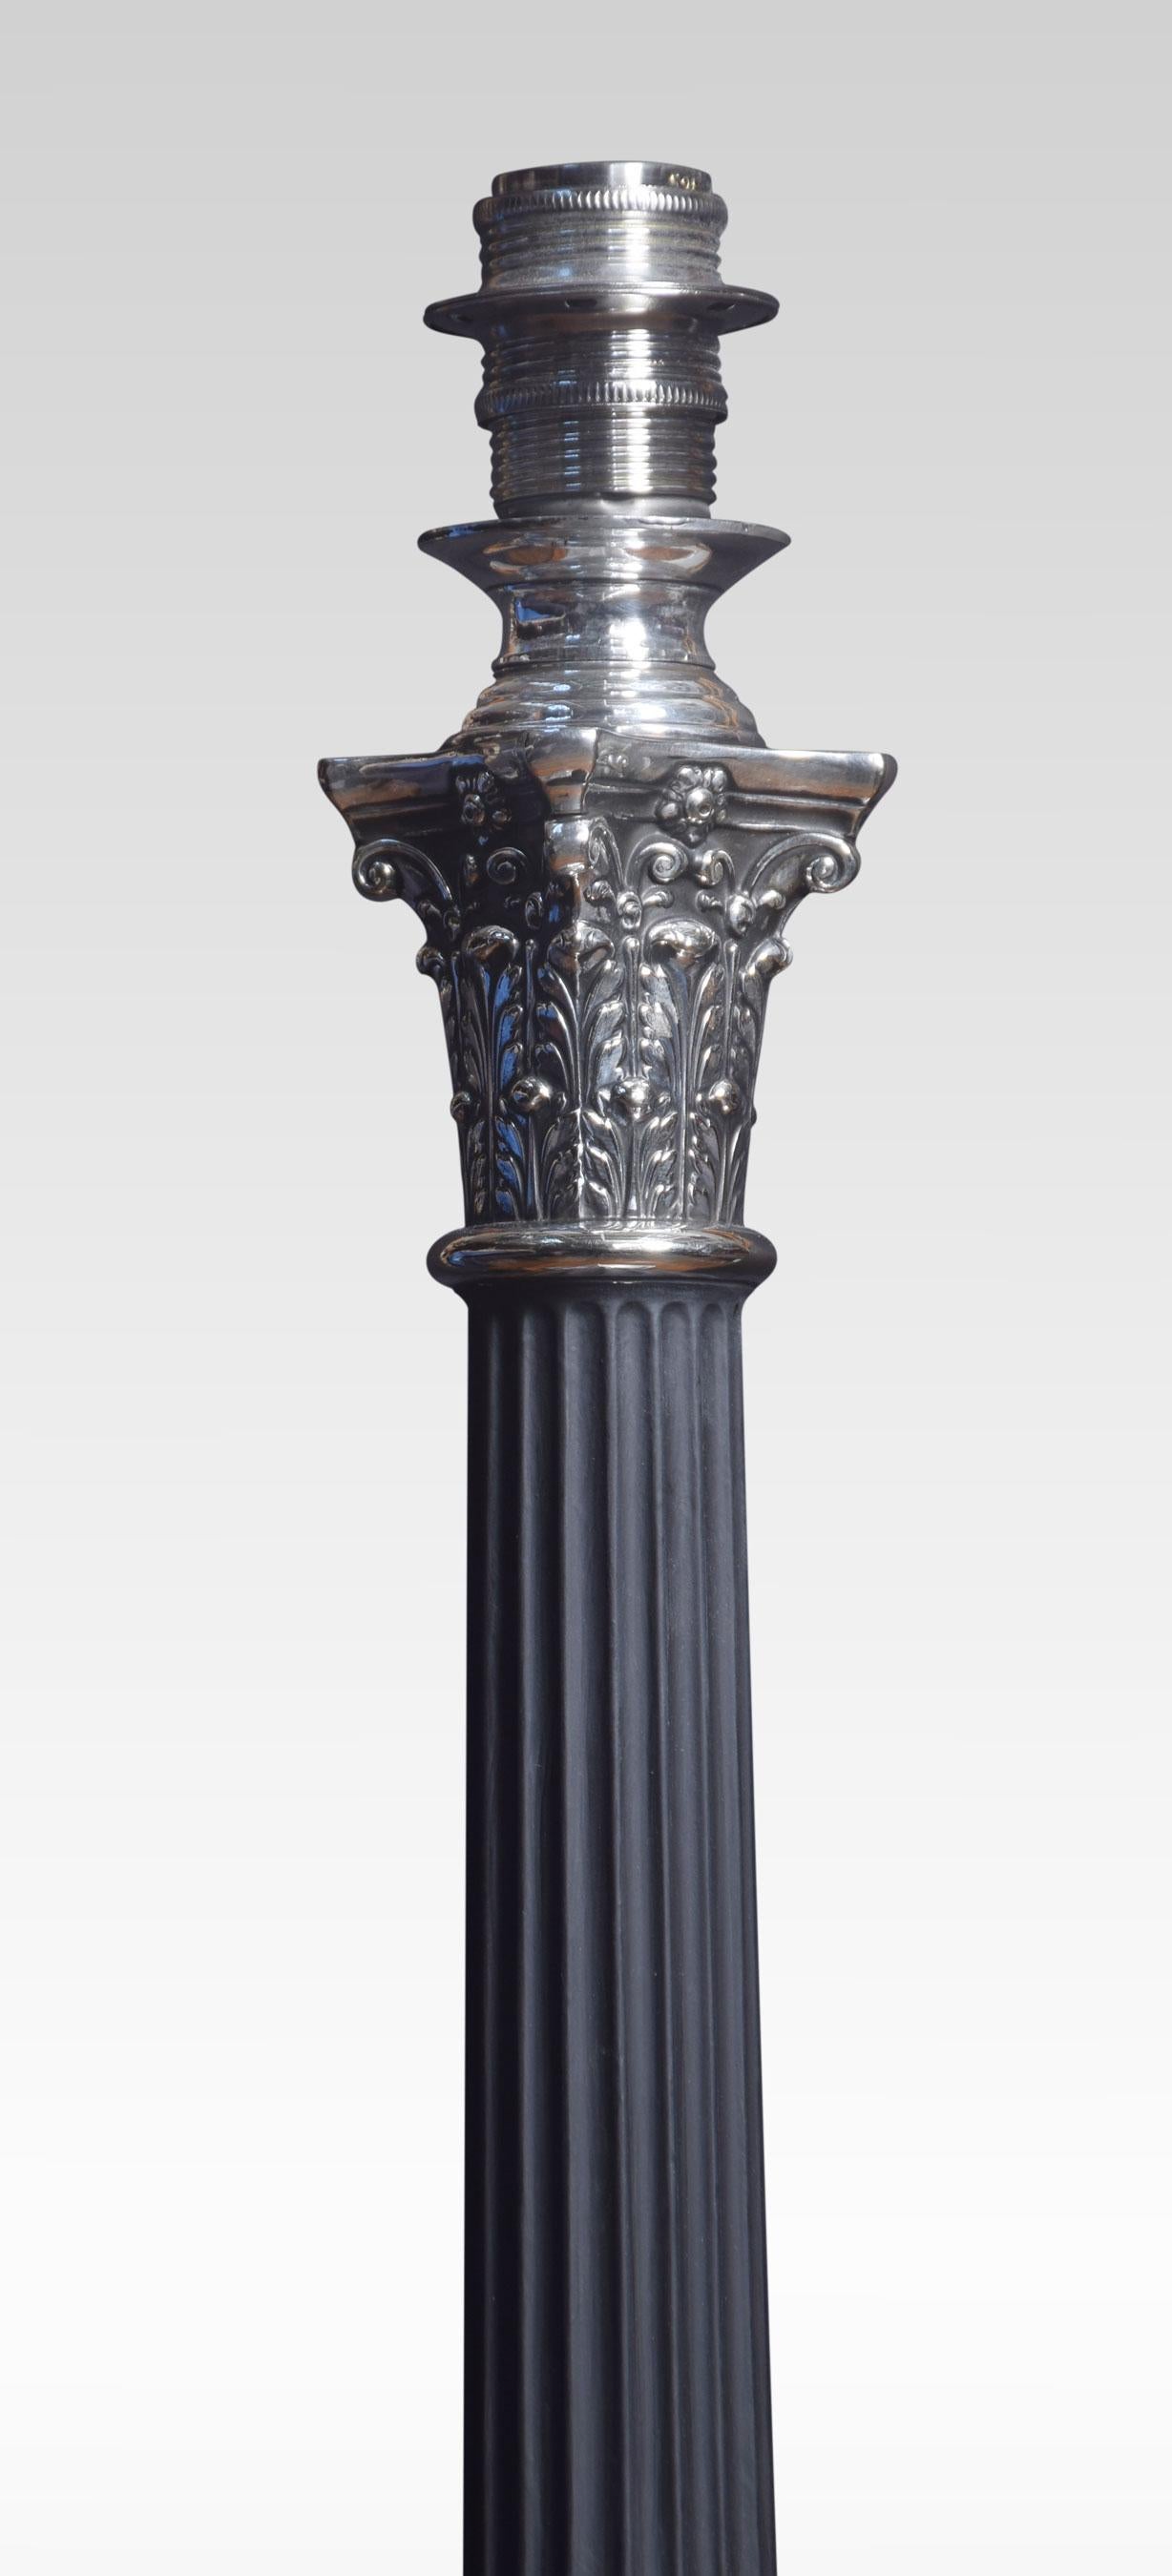 Electroplated table lamp, having a Corinthian column on a stepped square base. The lamp has been rewired.
Dimensions:
Height 19.5 inches
Width 7 inches
Depth 7 inches.